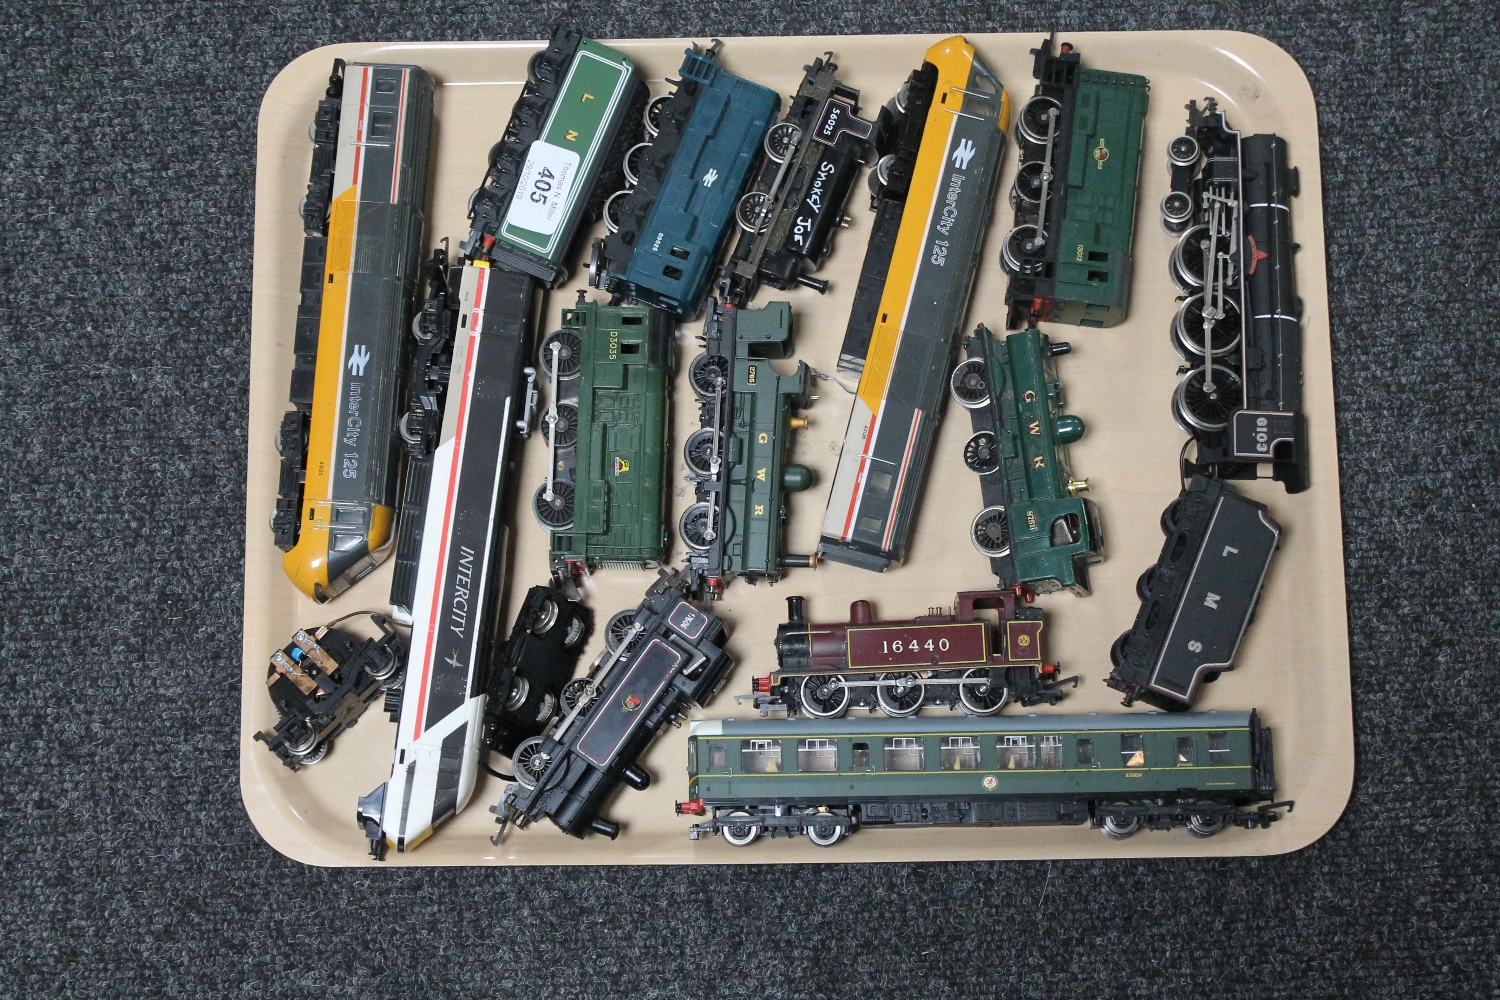 A tray of model locomotive engines by Hornby etc